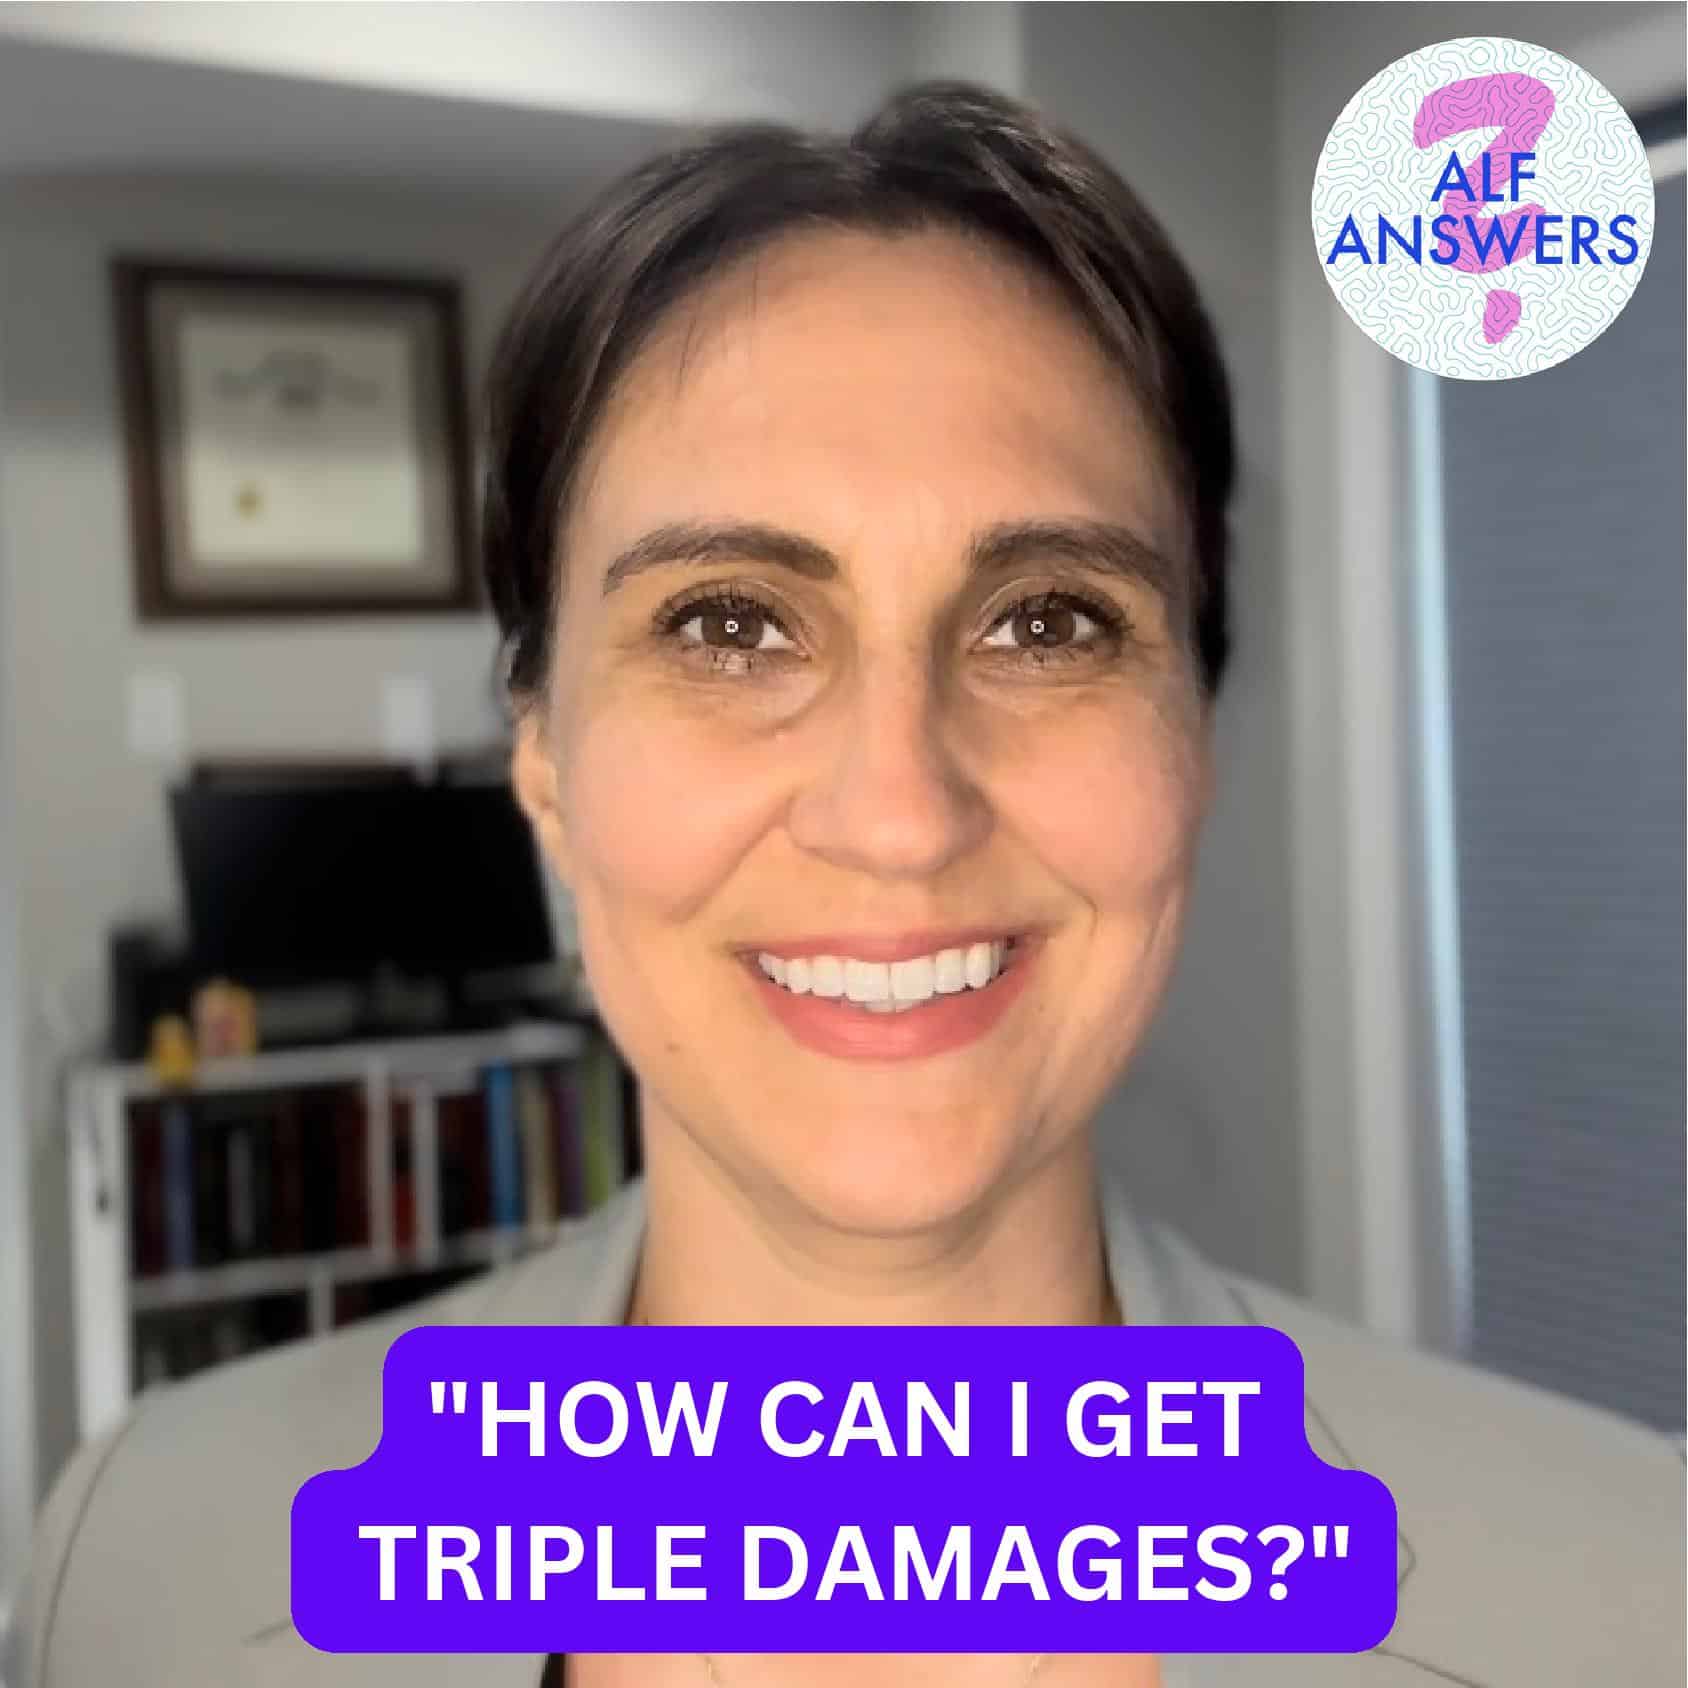 ALF Answers: “How can I get Triple Damages?”